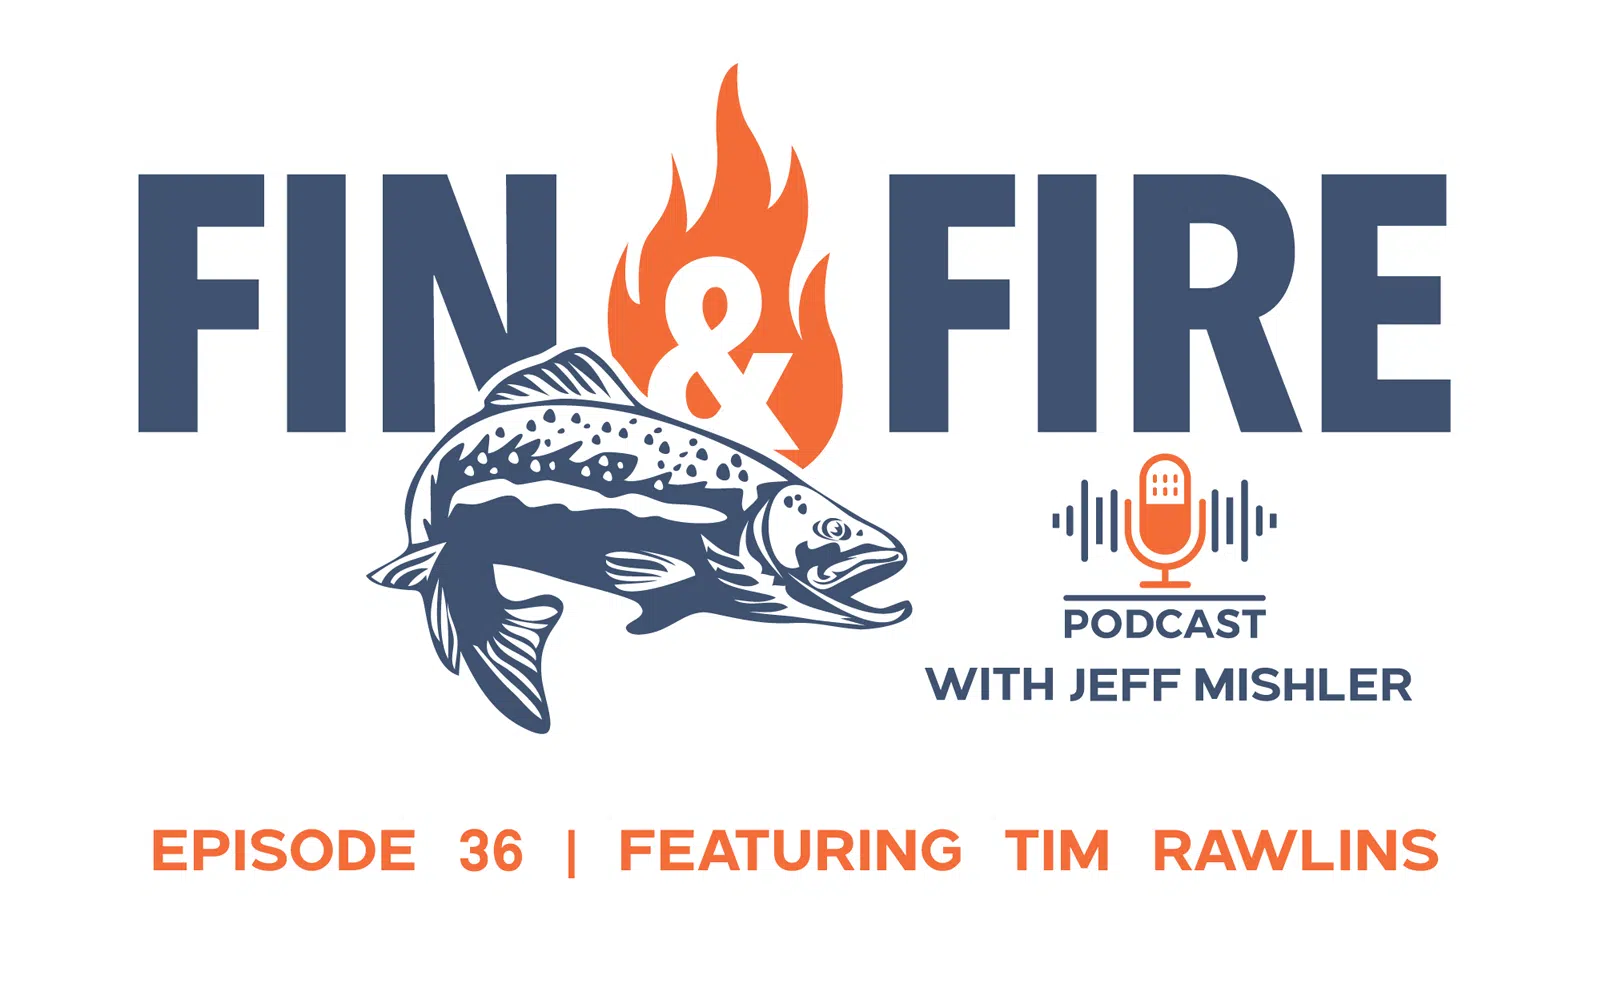 Episode 36 Featuring Tim Rawlins---The Line Speed Jedi